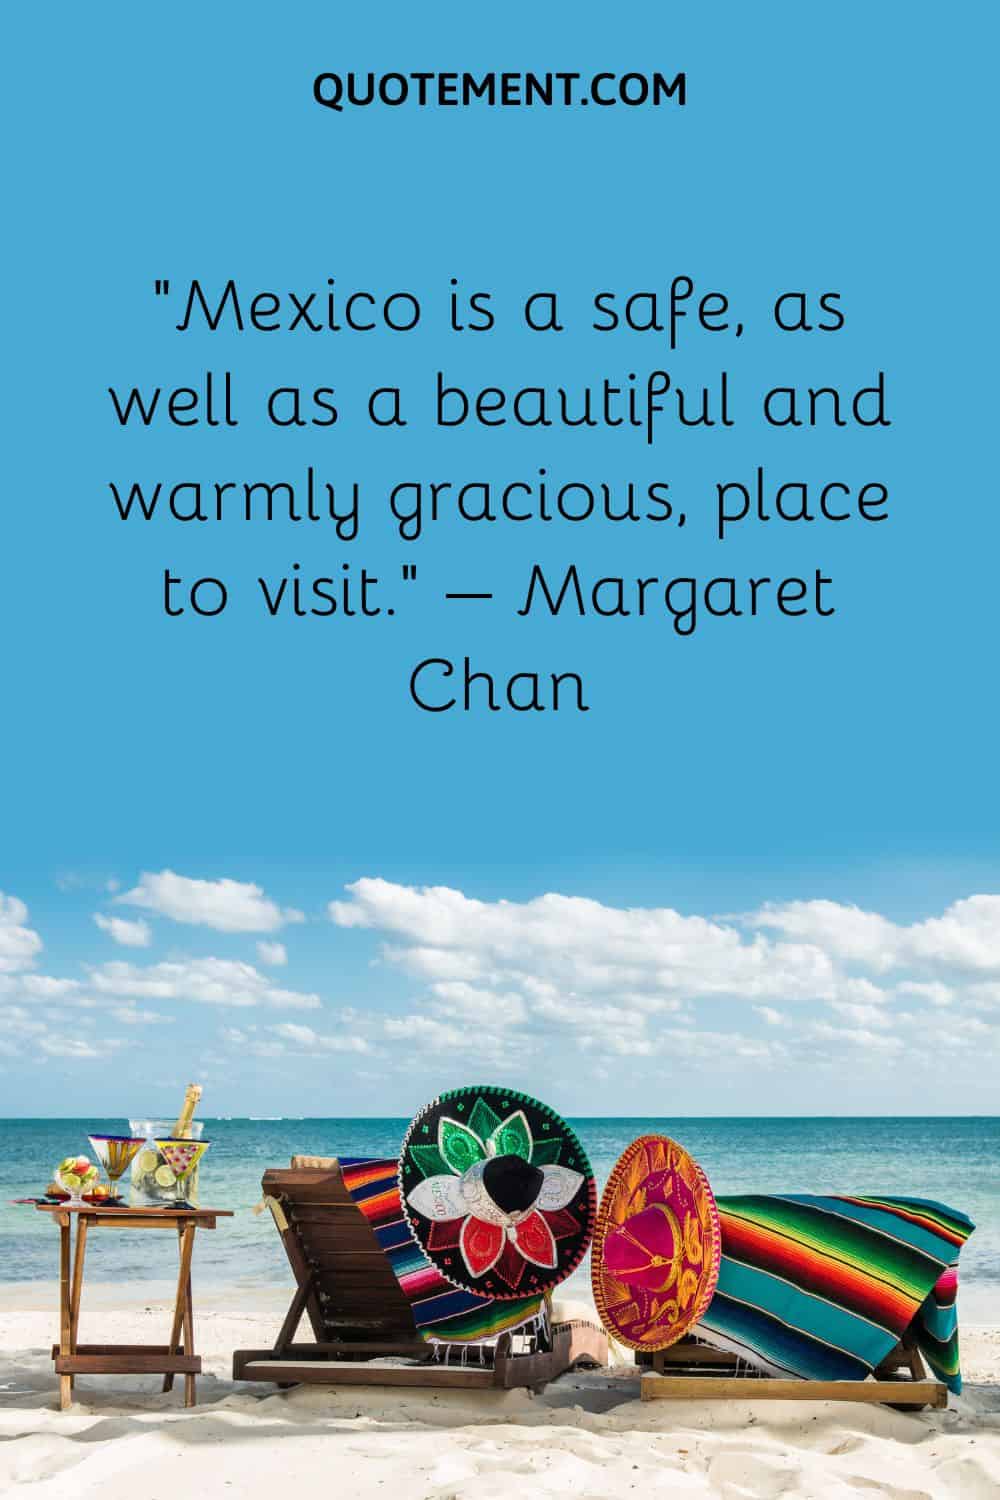 Mexico is a safe, as well as a beautiful and warmly gracious, place to visit